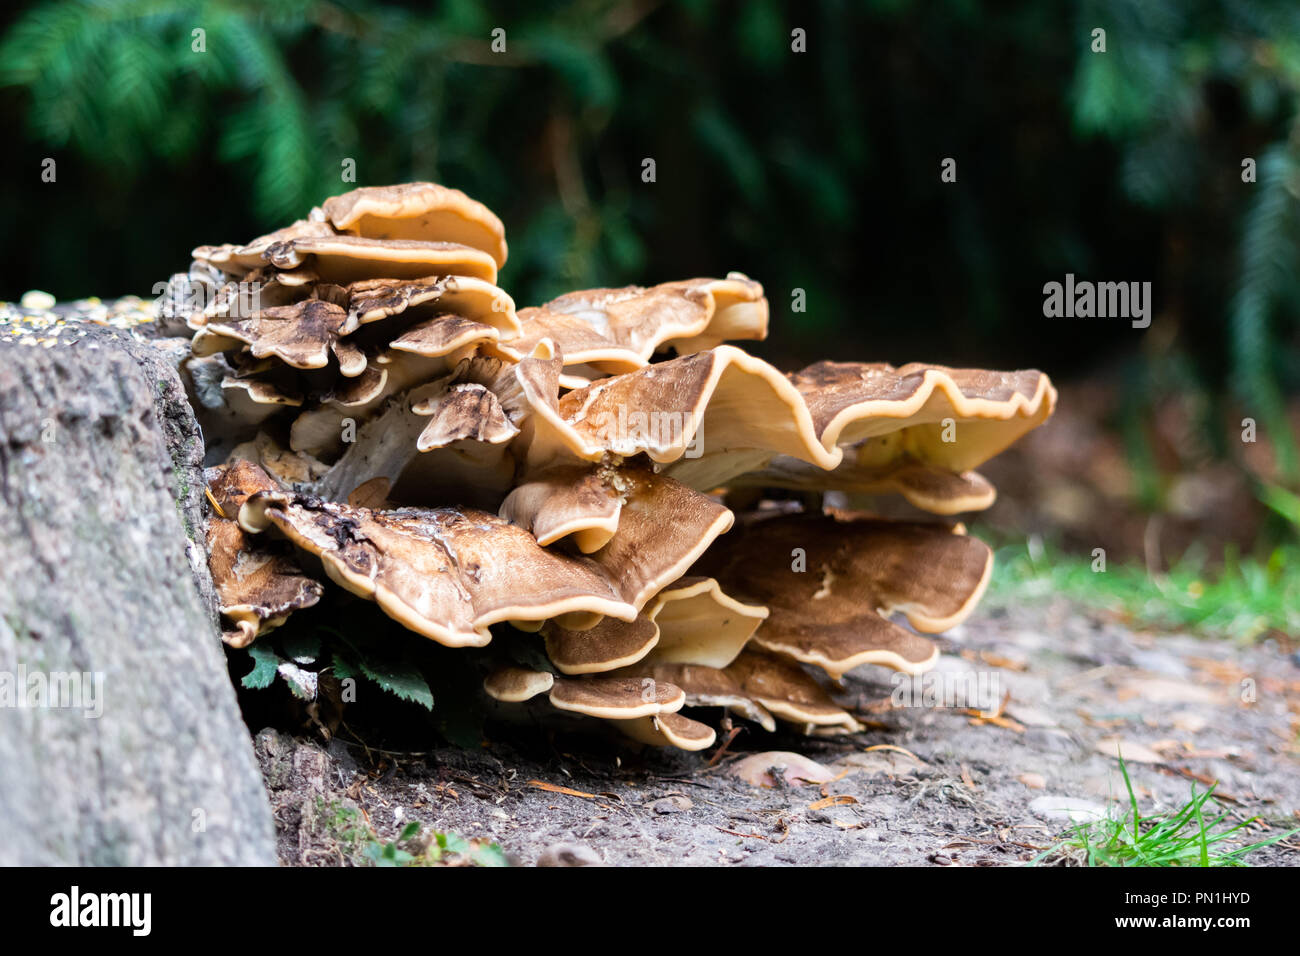 A large brown fungus growing out of the side of an old tree stump Stock Photo